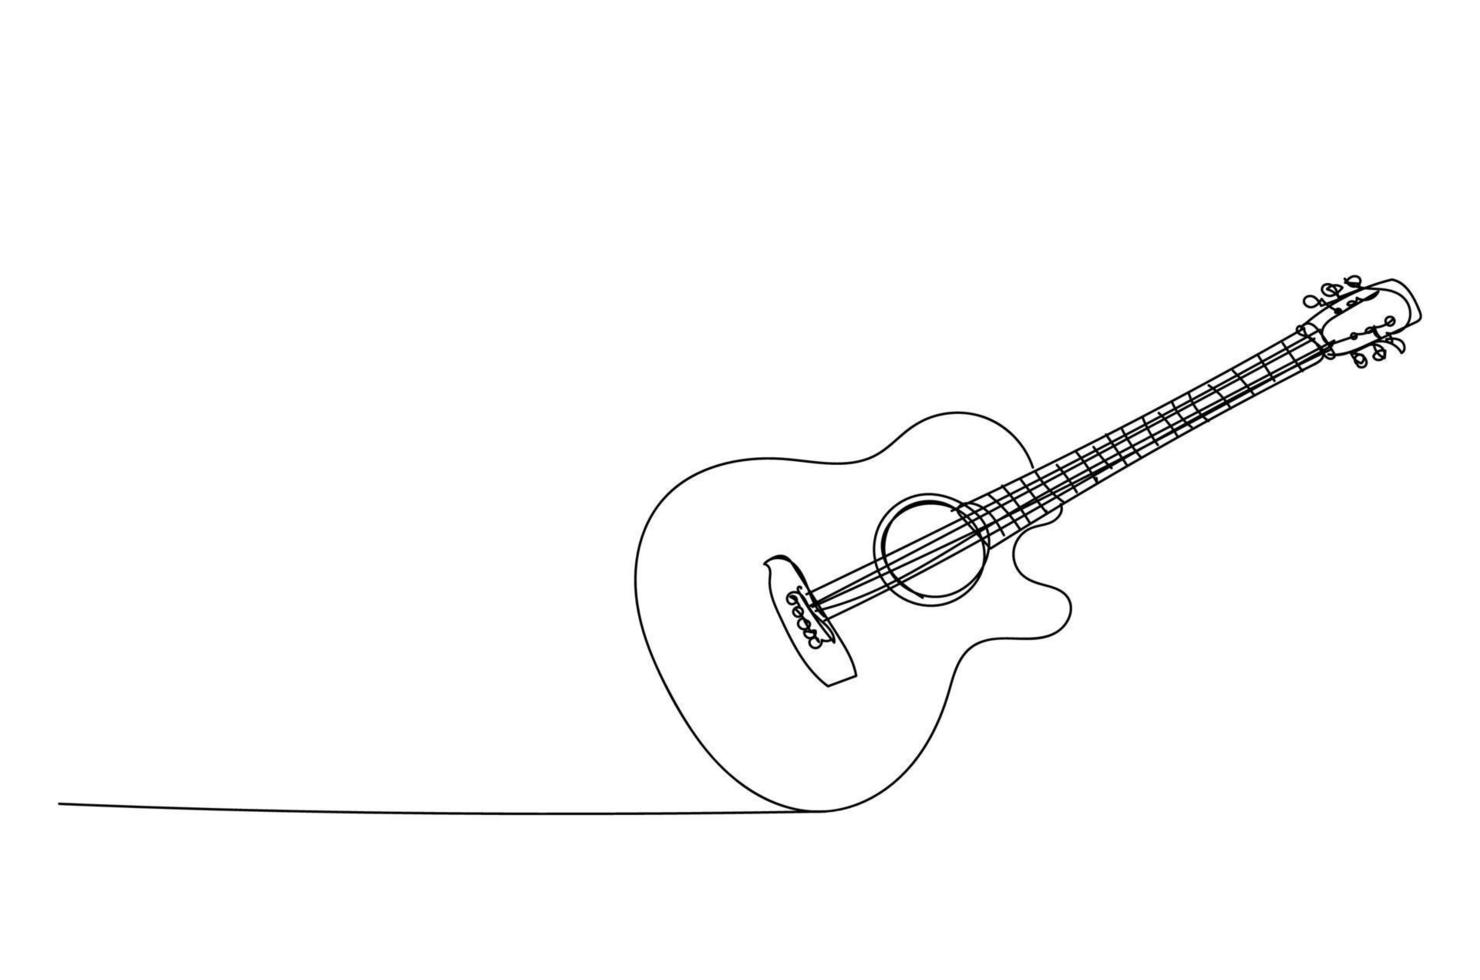 Acoustic Guitar ,line drawing style, vector design